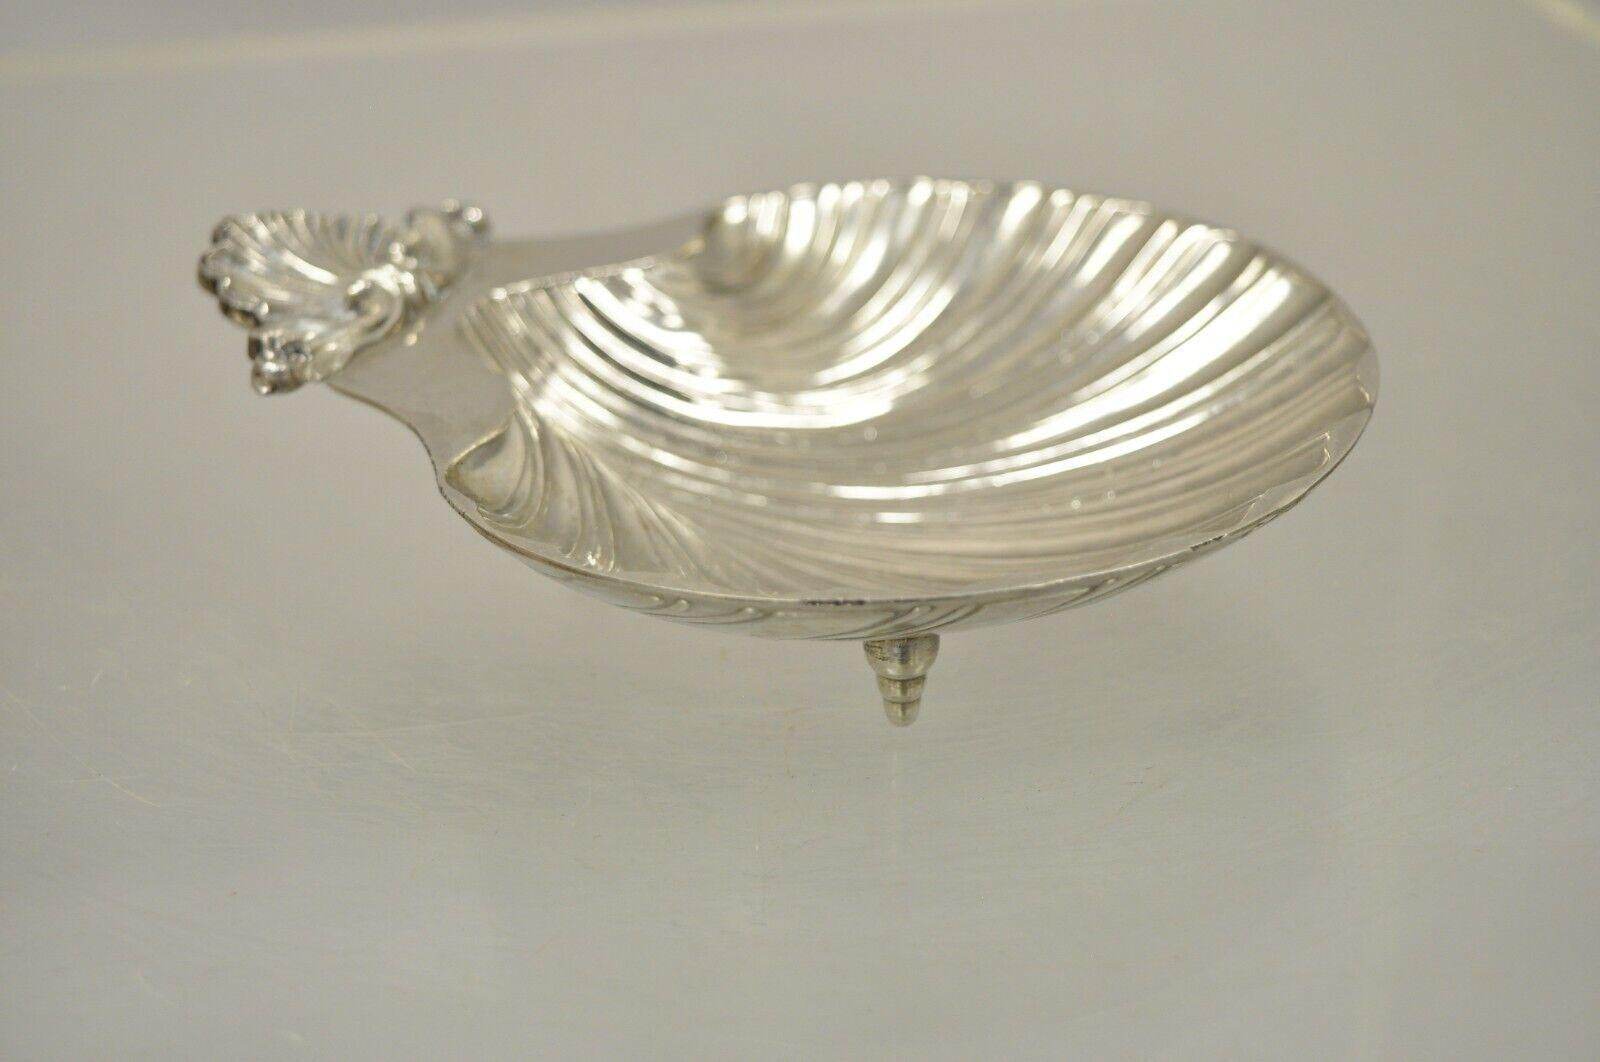 Silver Plate Sheffield England Usa Small Clam Shell Trinket Dish Reproduction 1700 - 1800 